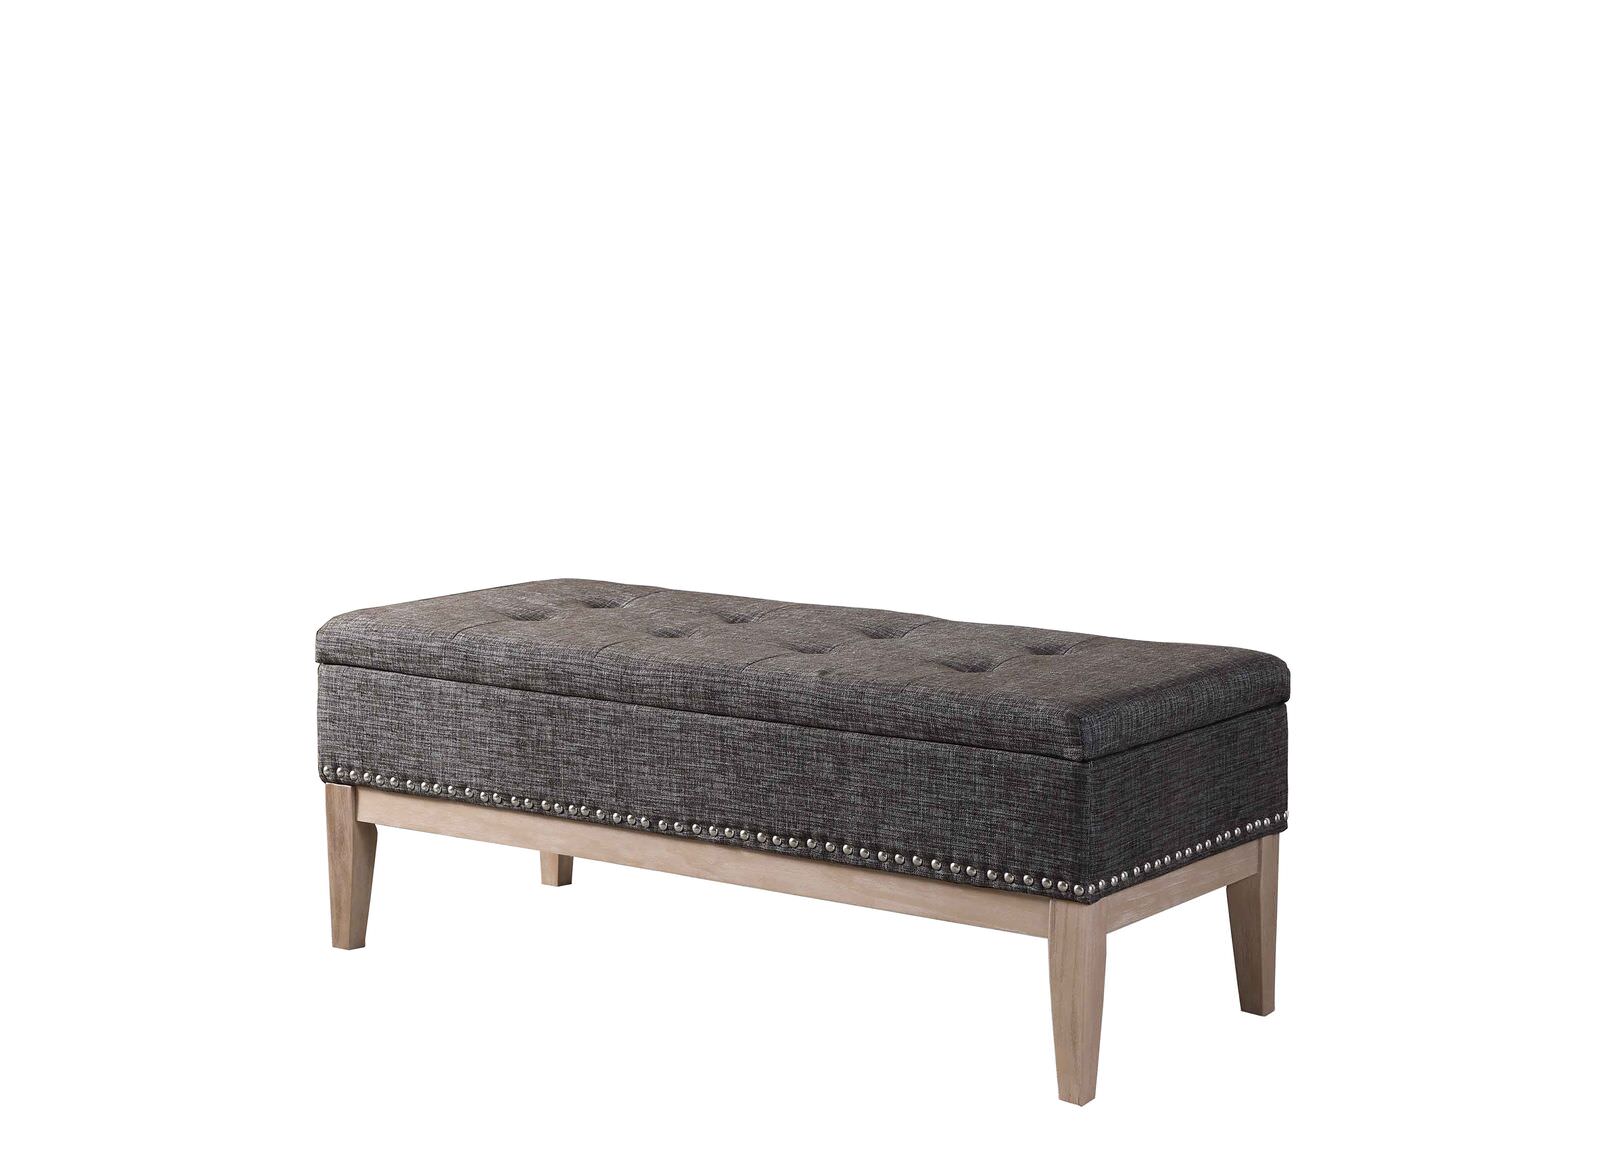 Ore International 18" Tufted Mid-Century Storage Bench with Nail head Trim